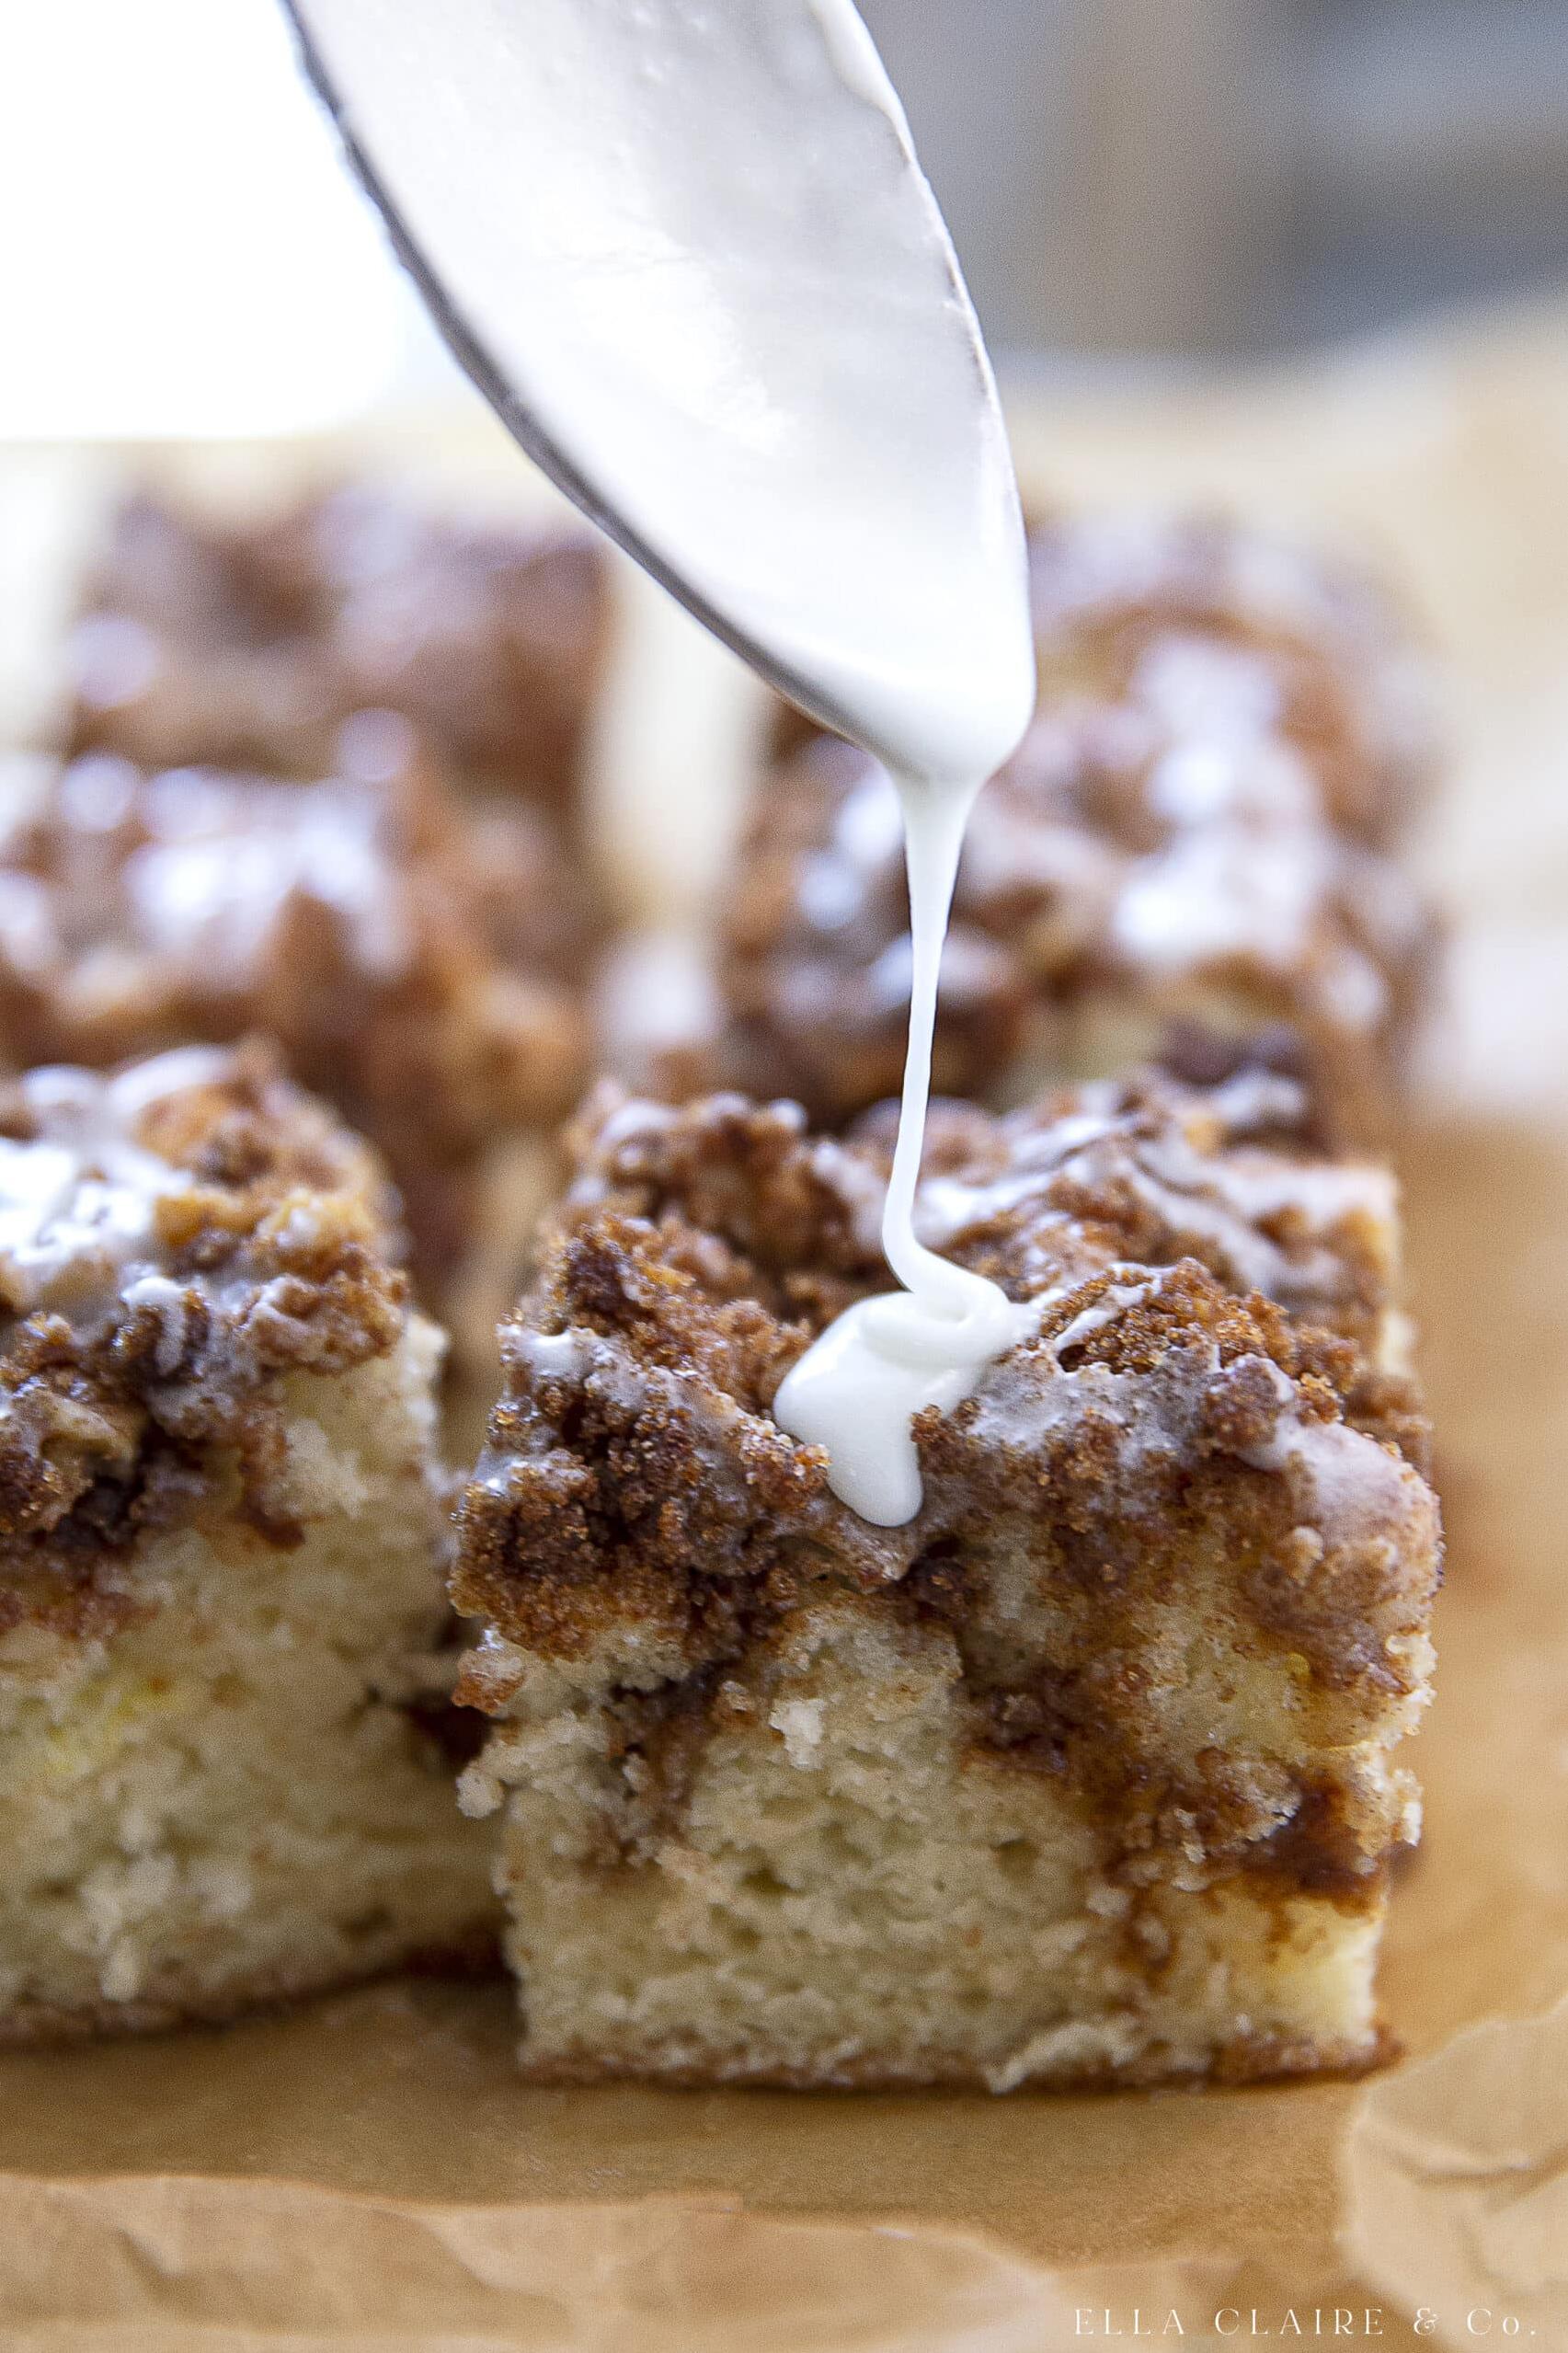  Make your next cup of coffee a little sweeter with a slice of this homemade coffee cake.